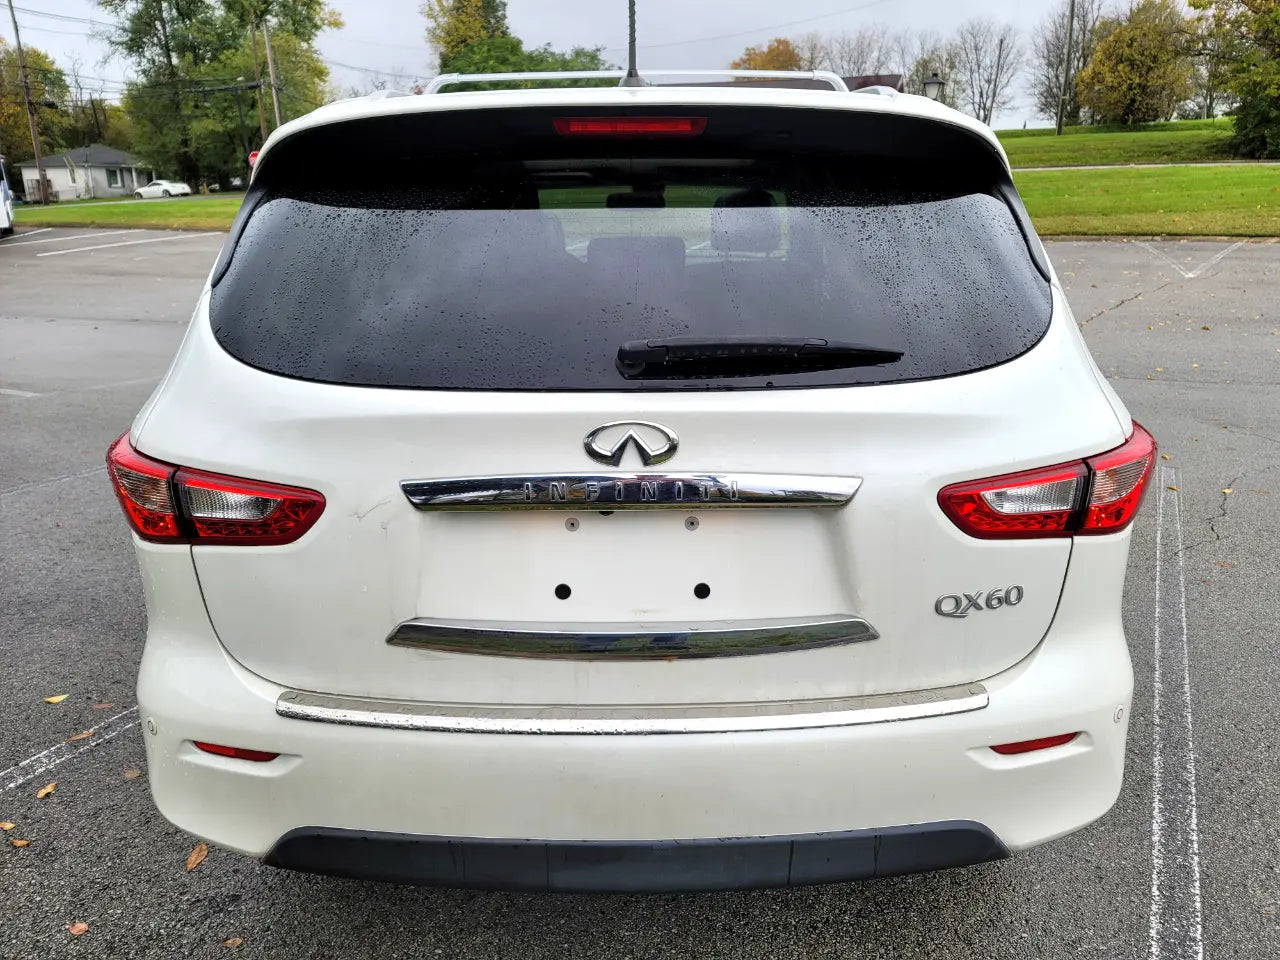 2015 Infiniti QX60 AWD $995 DOWN AND DRIVE IN 1 HOUR!